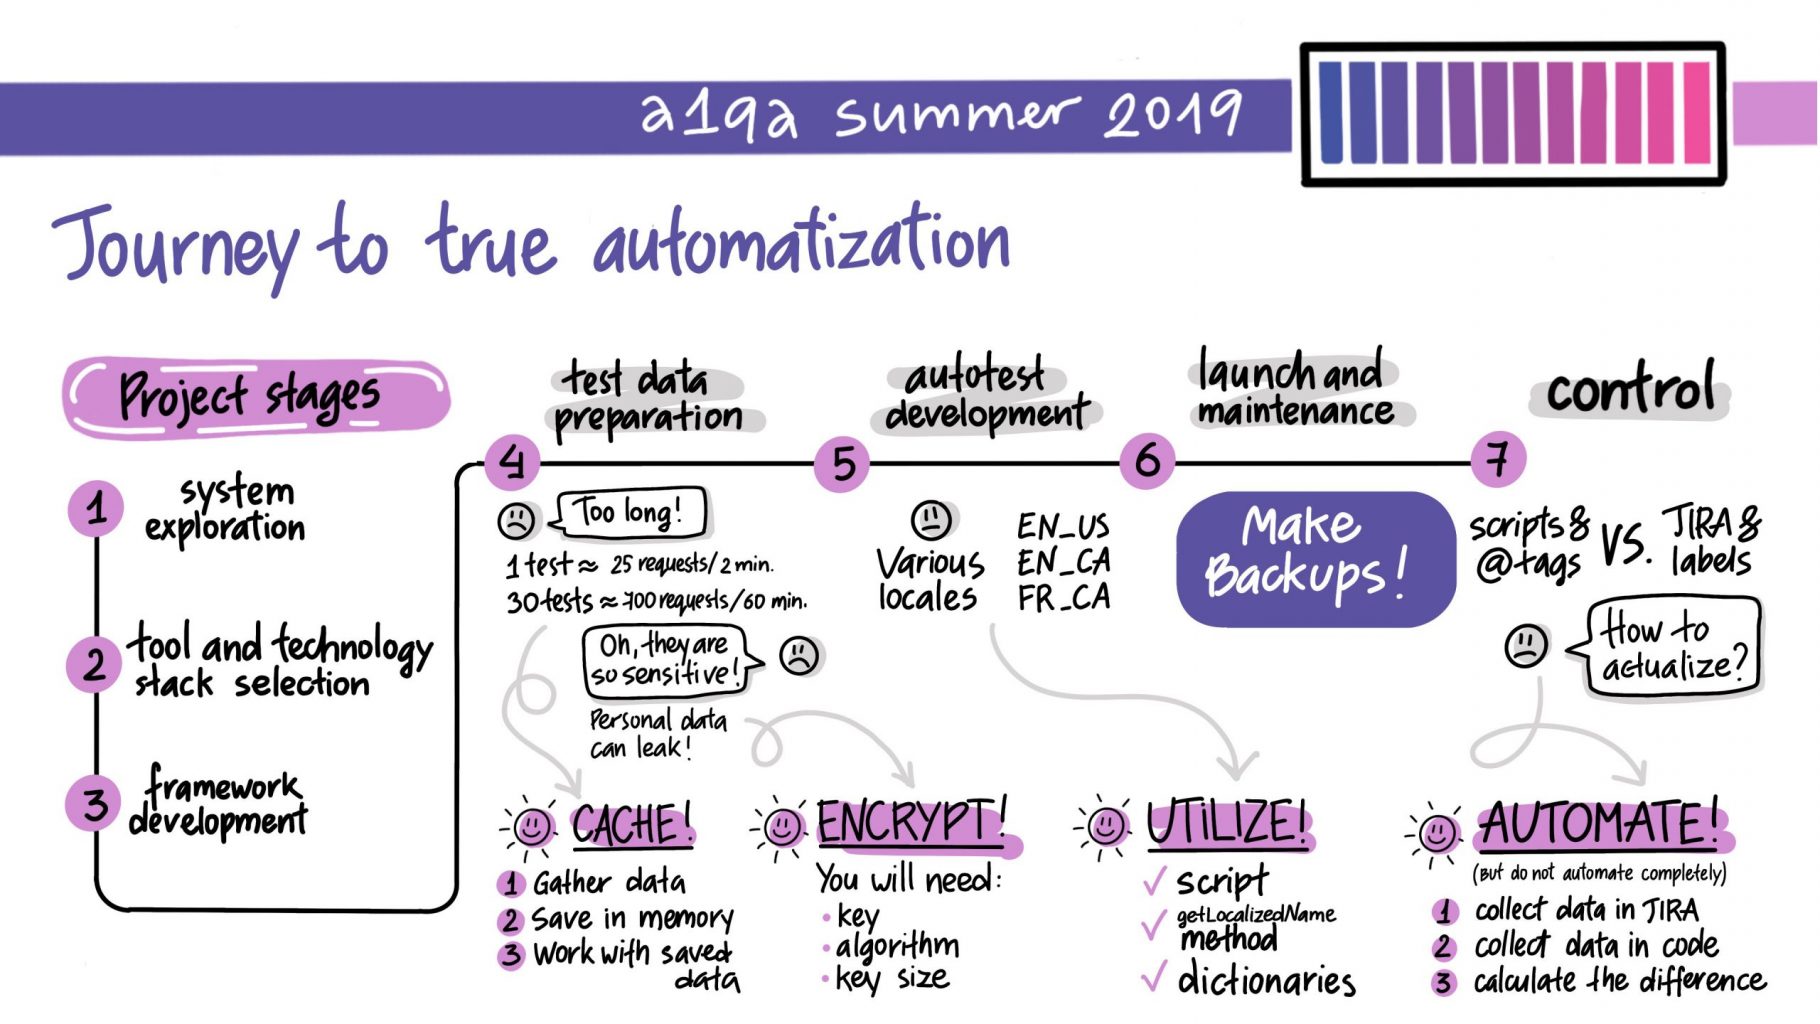 Test automation report at the 9th a1qa summer conference